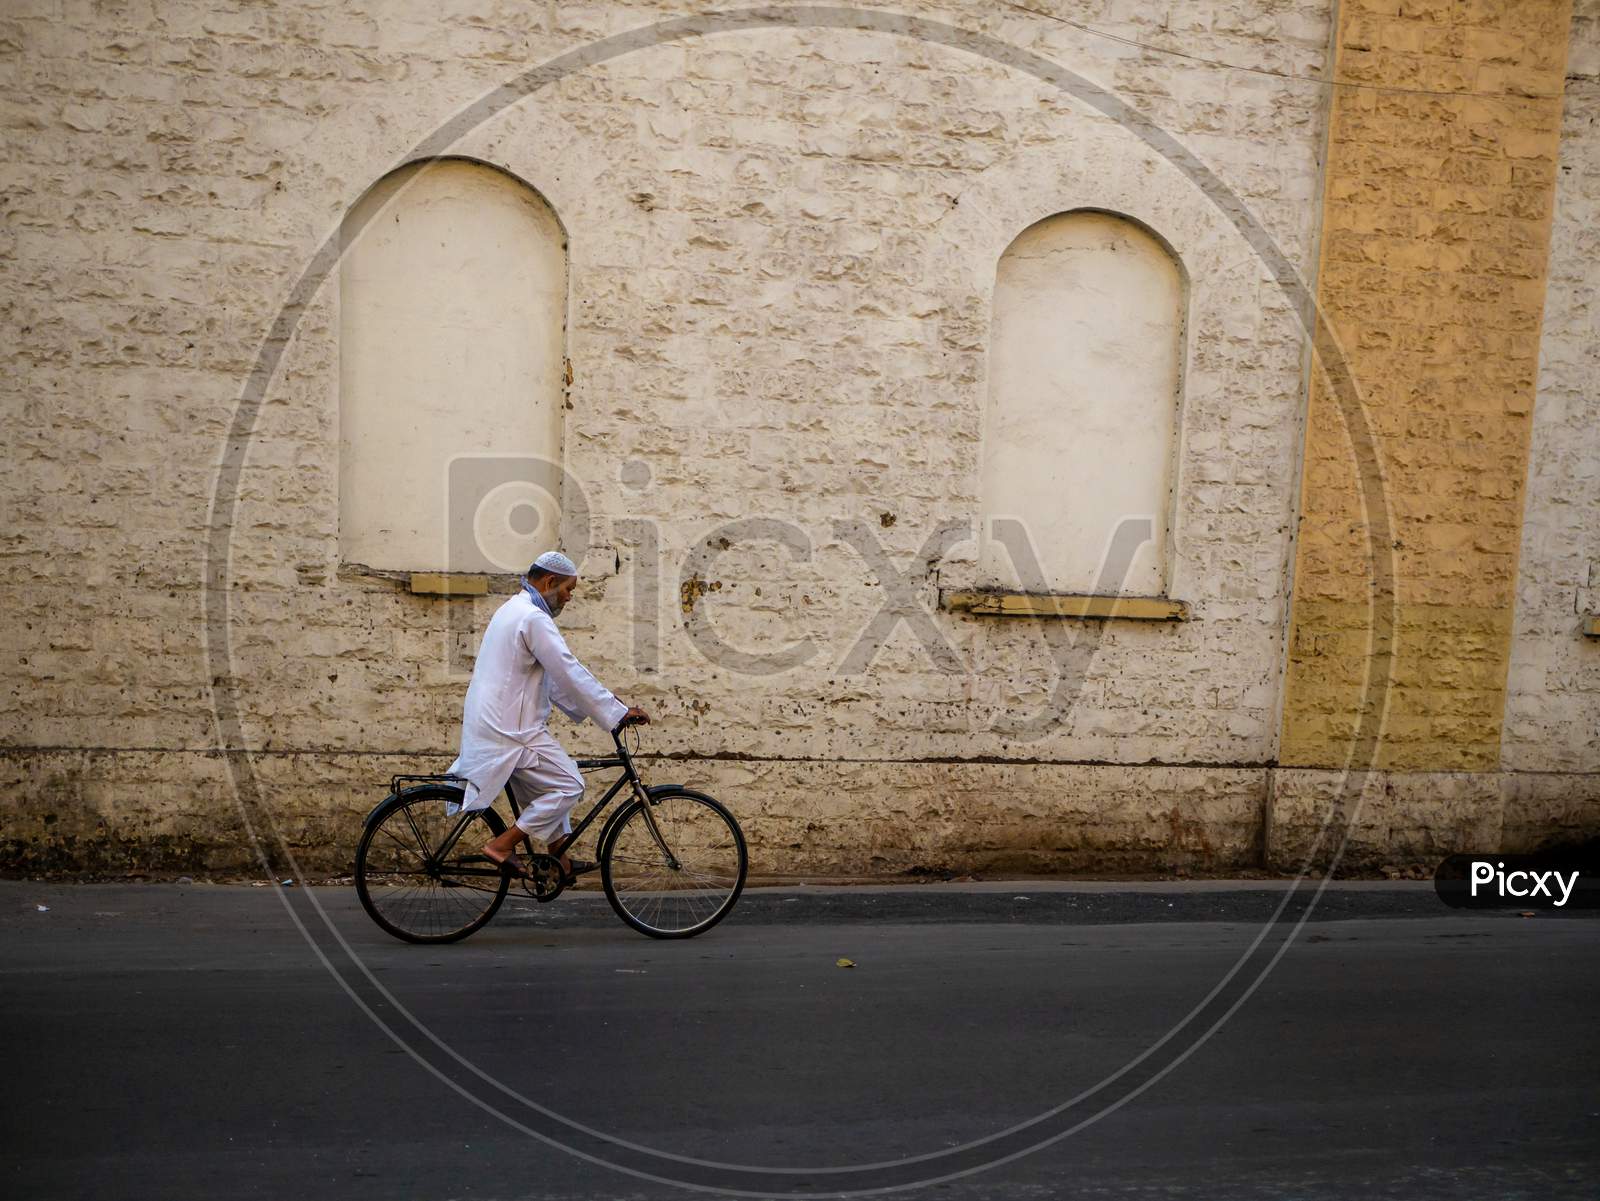 Muslim Old Age Man Wearing Traditional Islamic Clothes And Skull Cap Riding A Bicycle On The Streets Of Mumbai